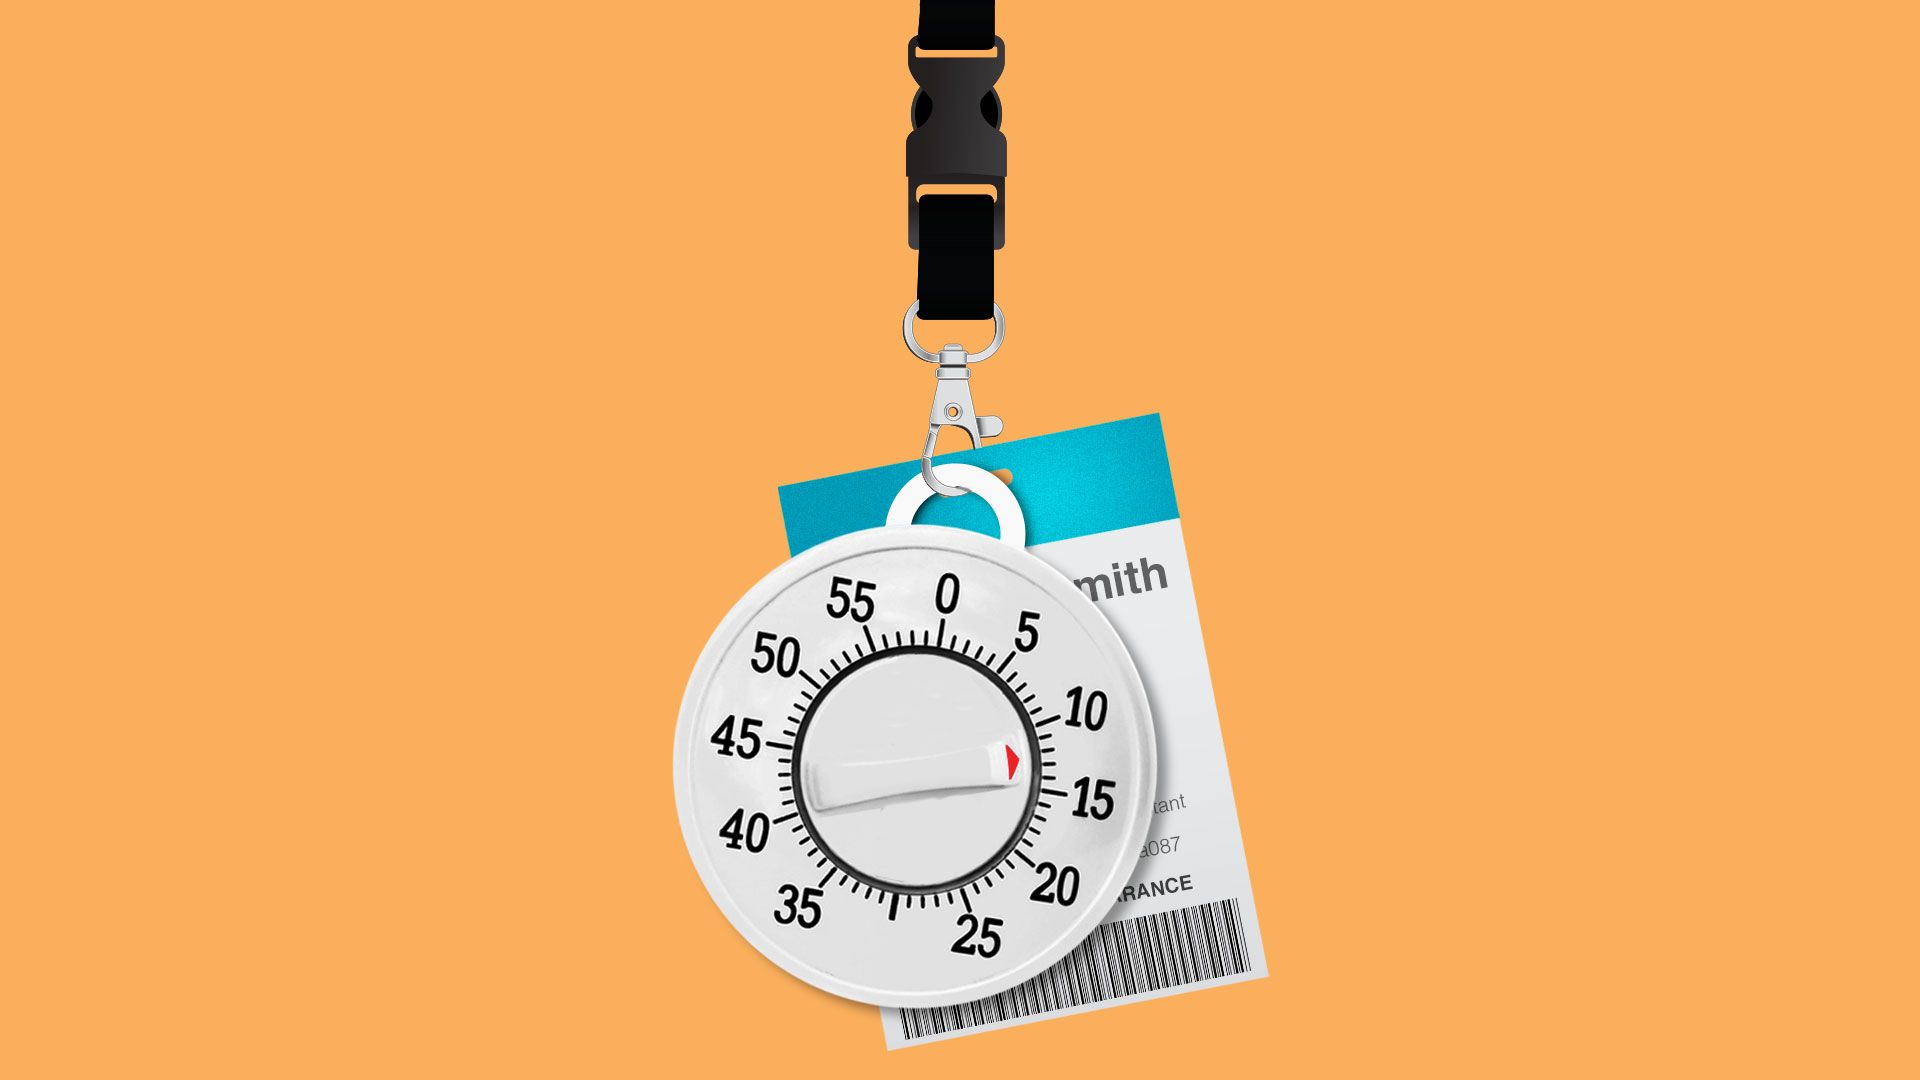 Illustration of an employee badge and egg timer on a lanyard.